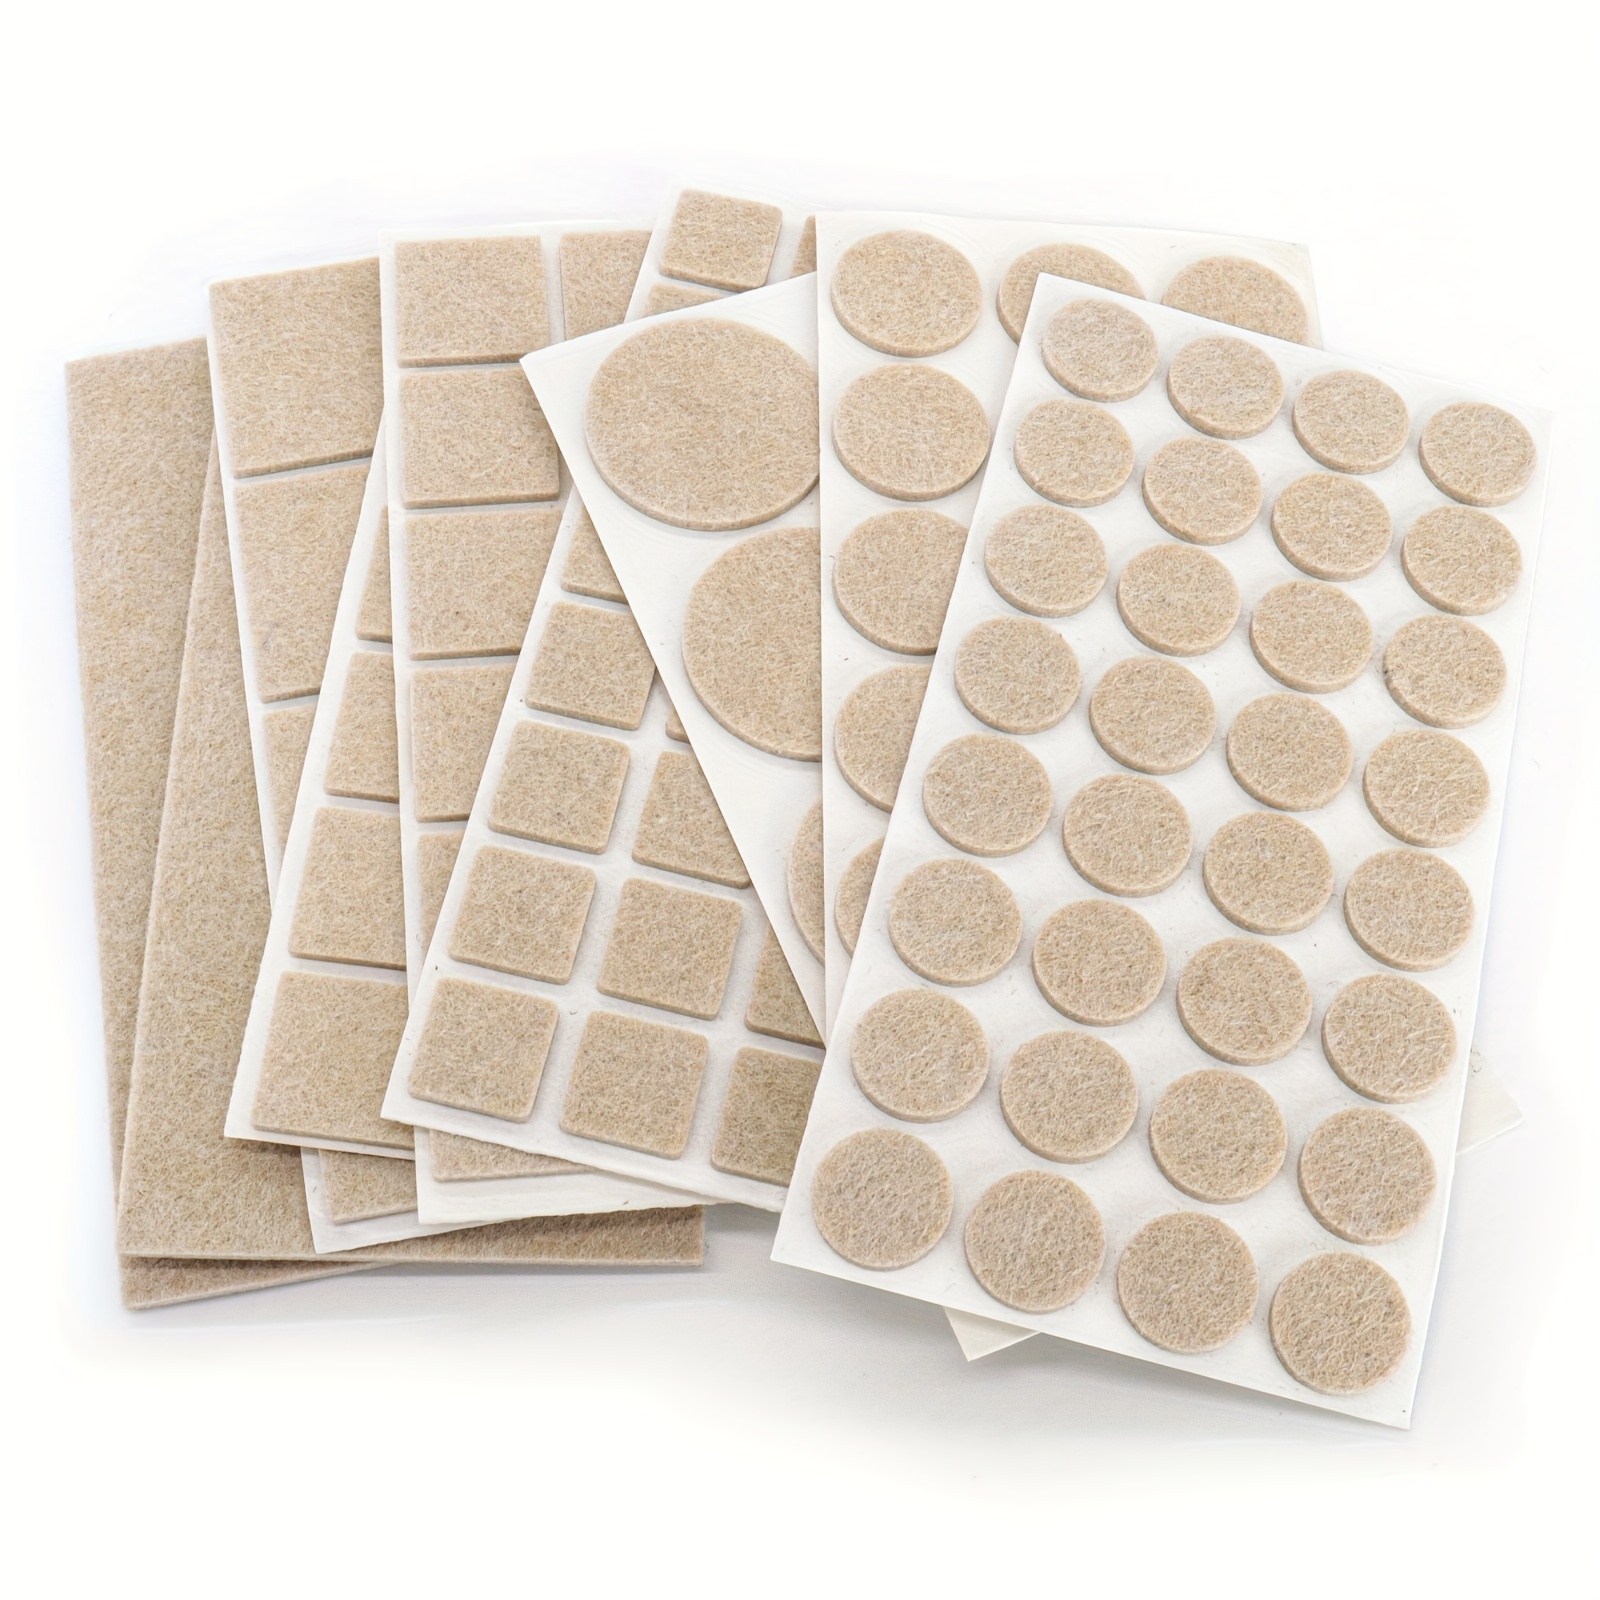 

Zr 130-piece Furniture Felt Pads Set In Neutral Beige, Various Sizes For Hardwood Floor Protection, Non-slip Chair Leg Pads, Metal Finish Protector For Furniture And Floor